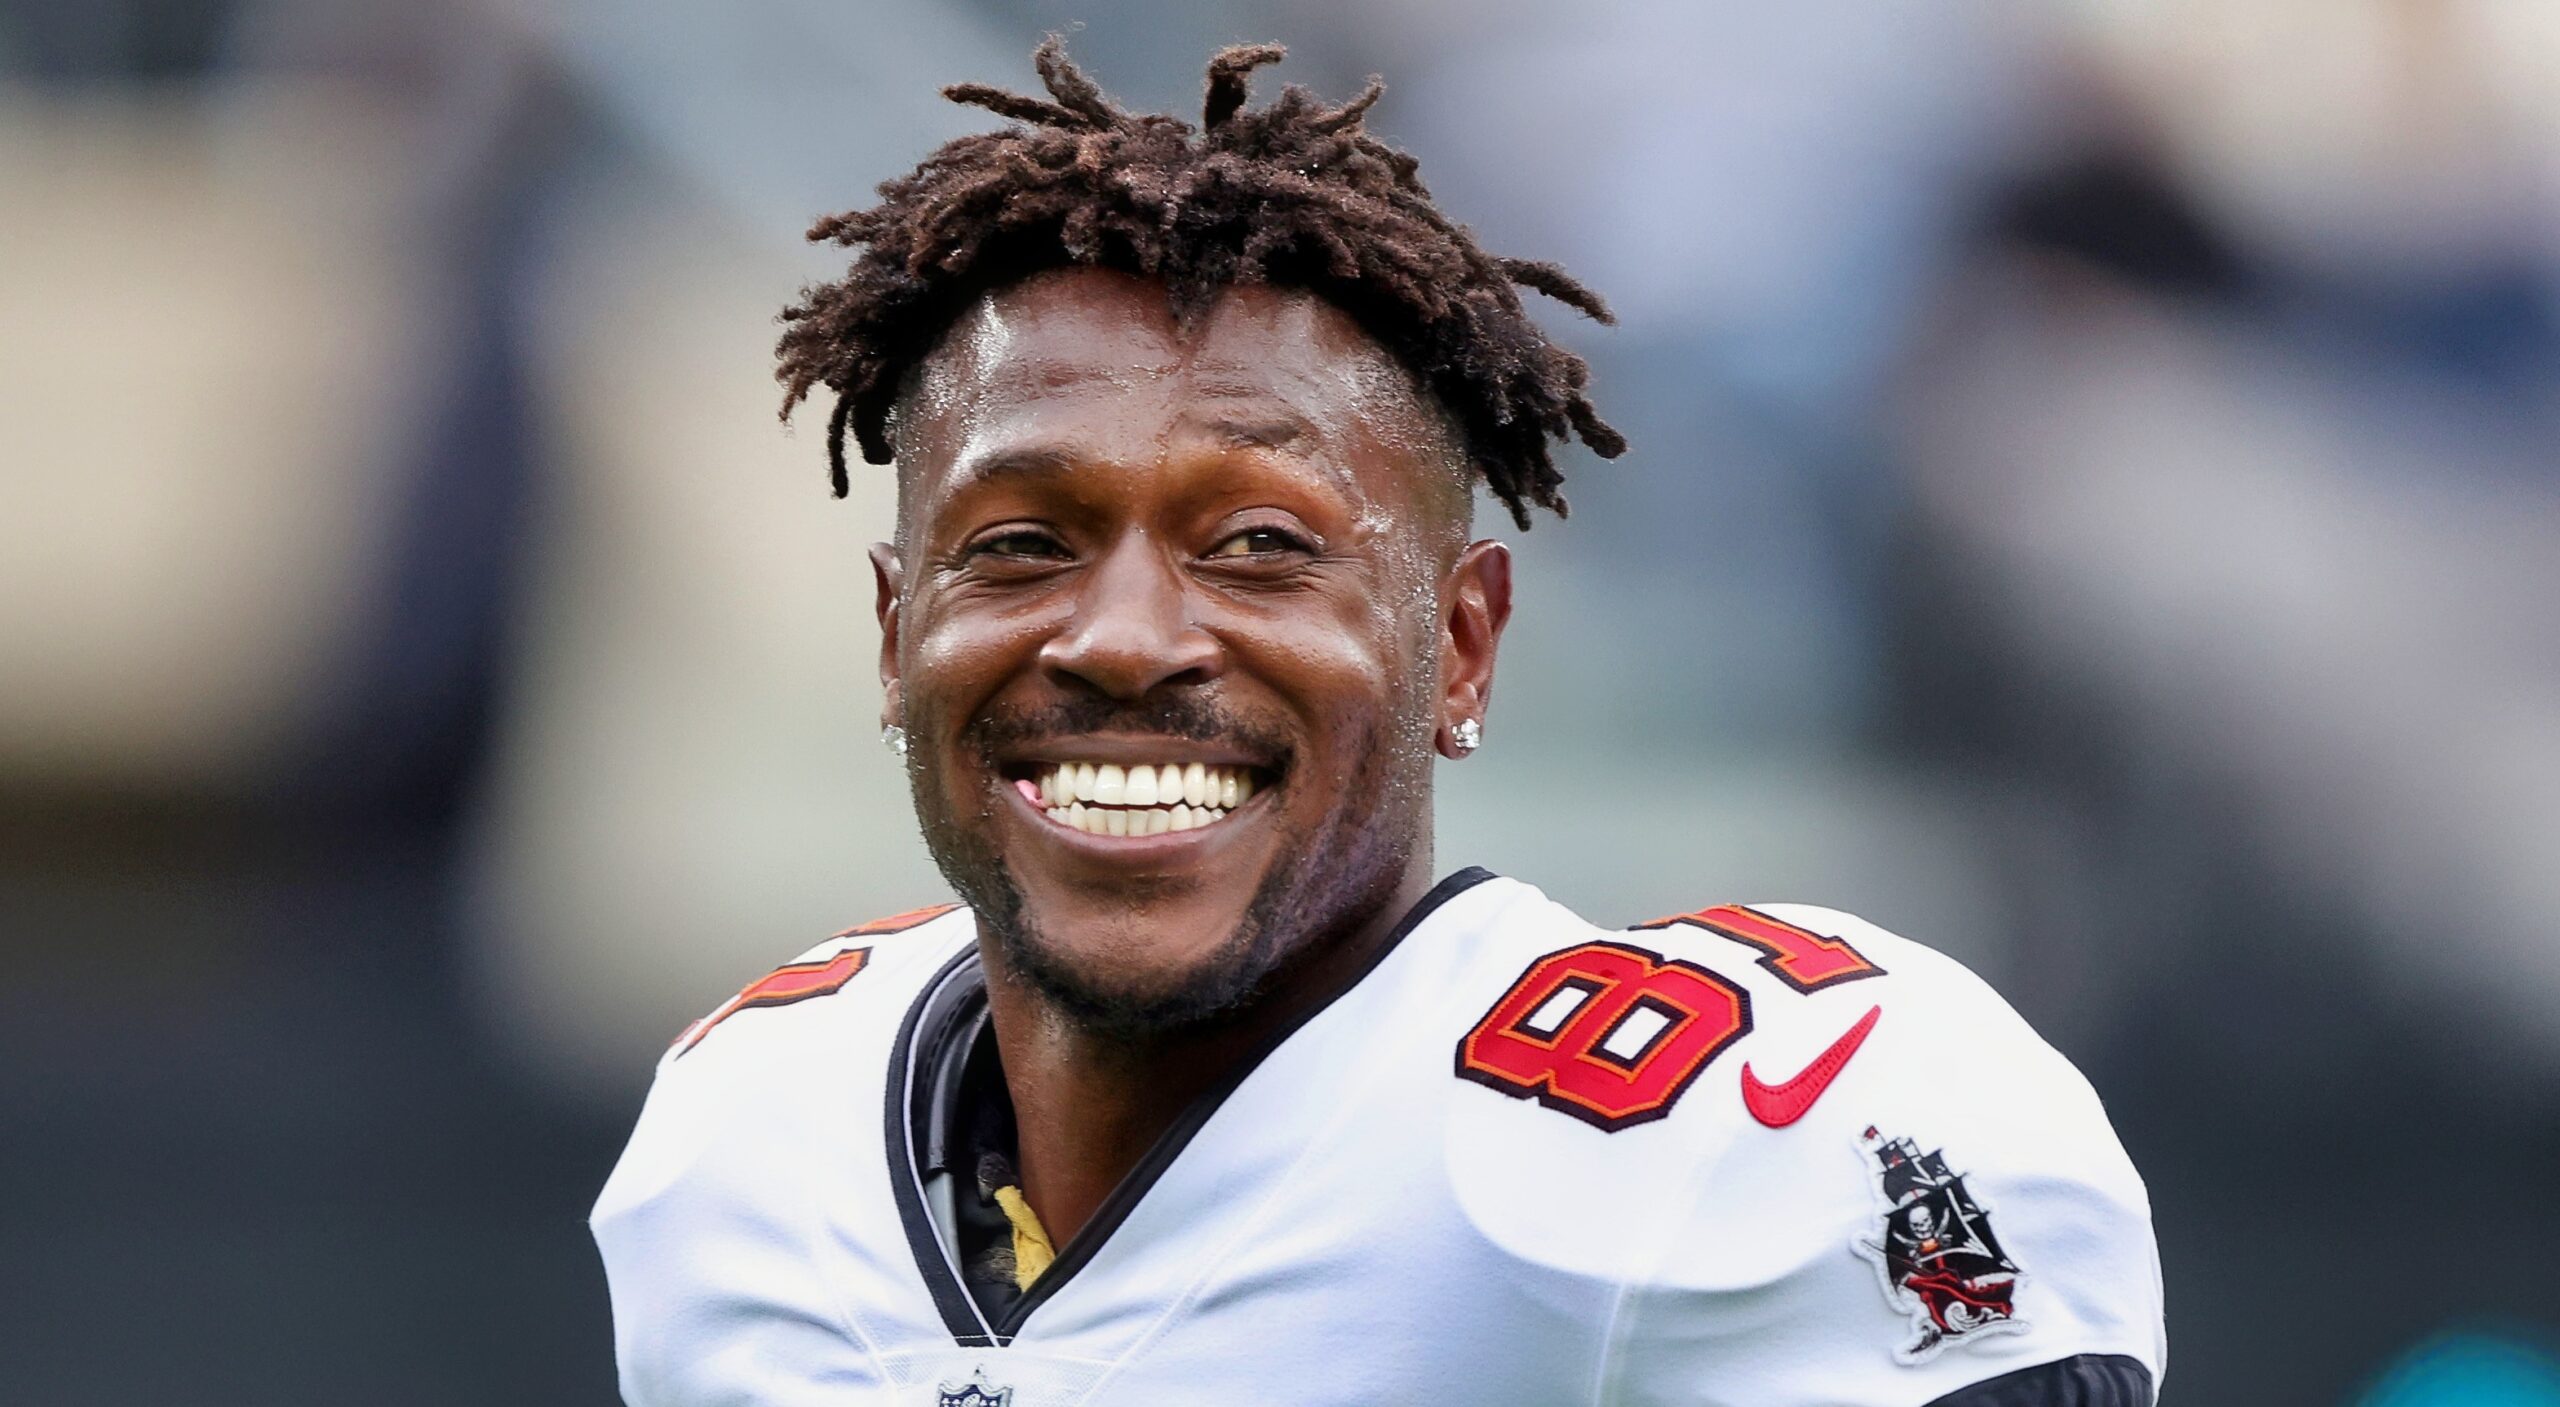 Antonio Brown Drops Massive Hint That Steelers Are Trading For Superstar Wide Receiver, And NFL Fans Are Losing Their Minds